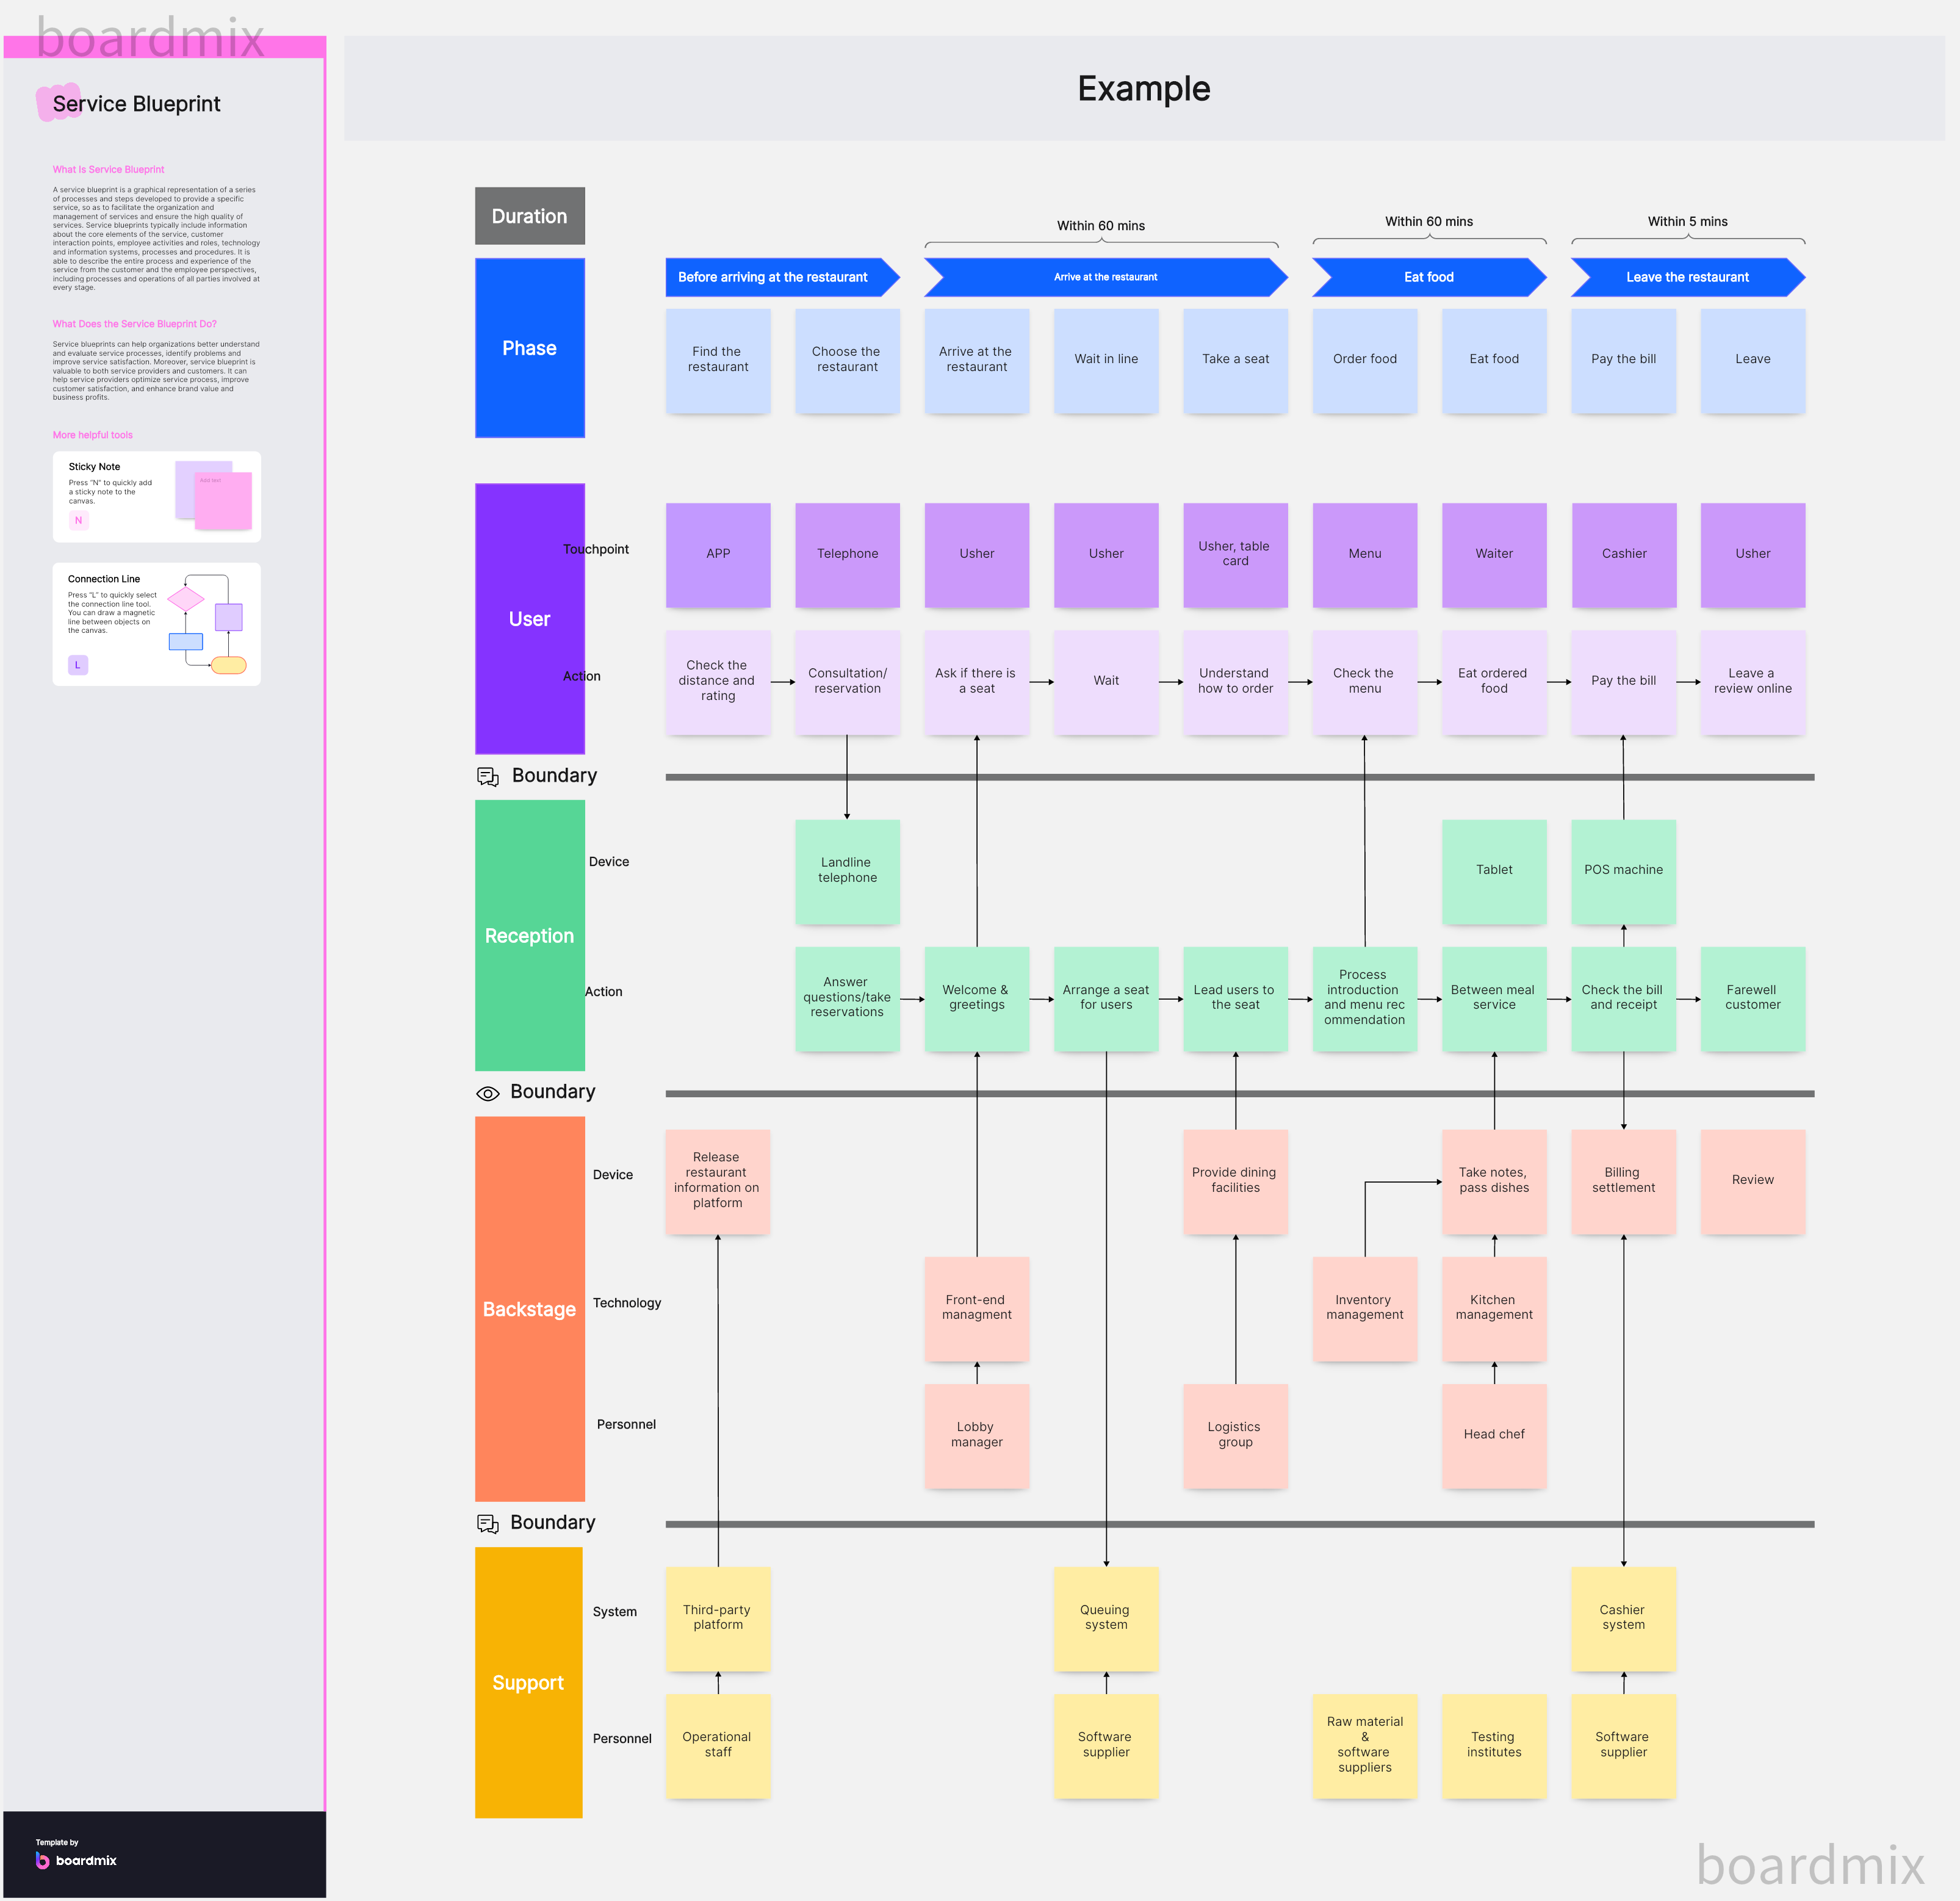 5 Service Blueprint Examples and Templates for Your Business